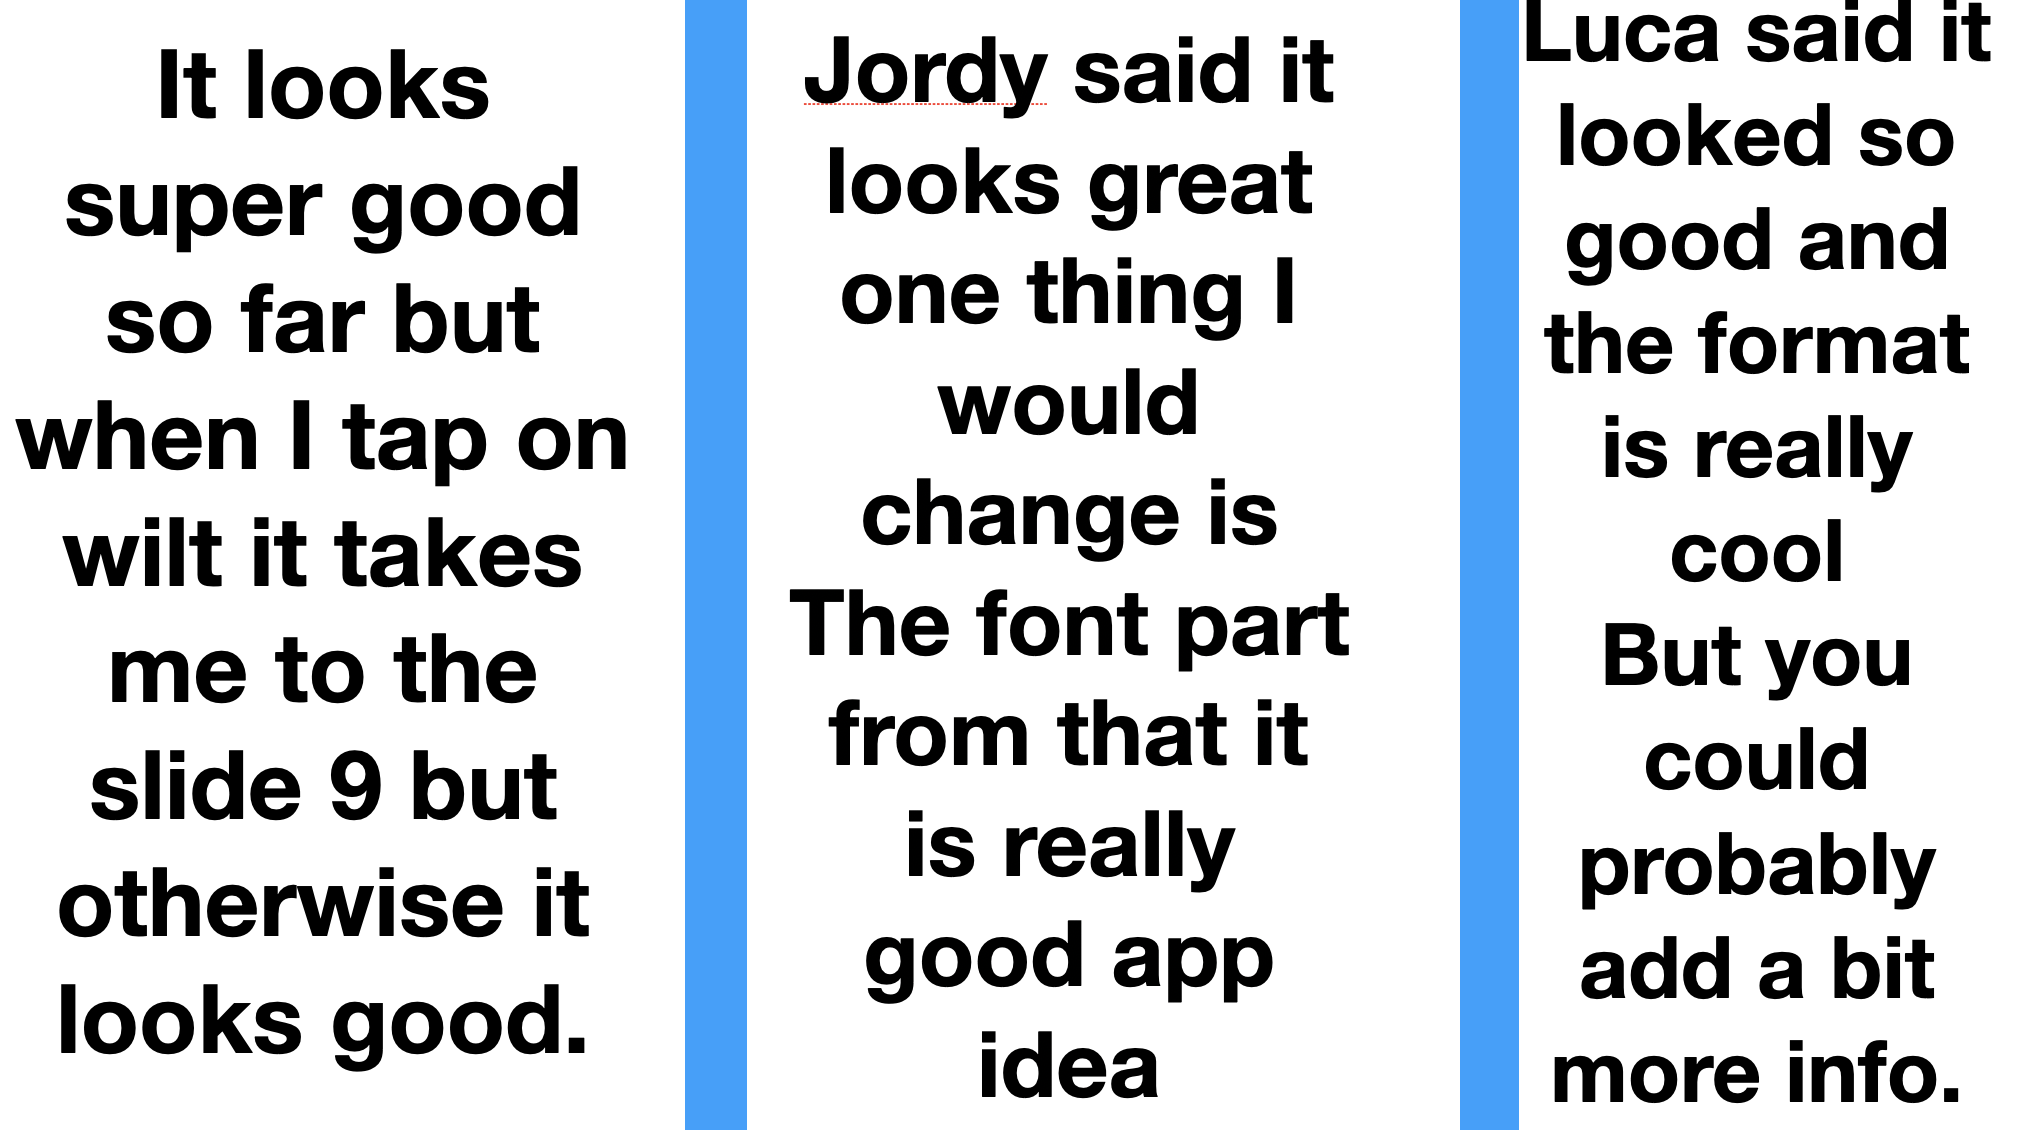 Here is an example of feedback students gave each other about their app ideas. They used this to improve their prototypes.